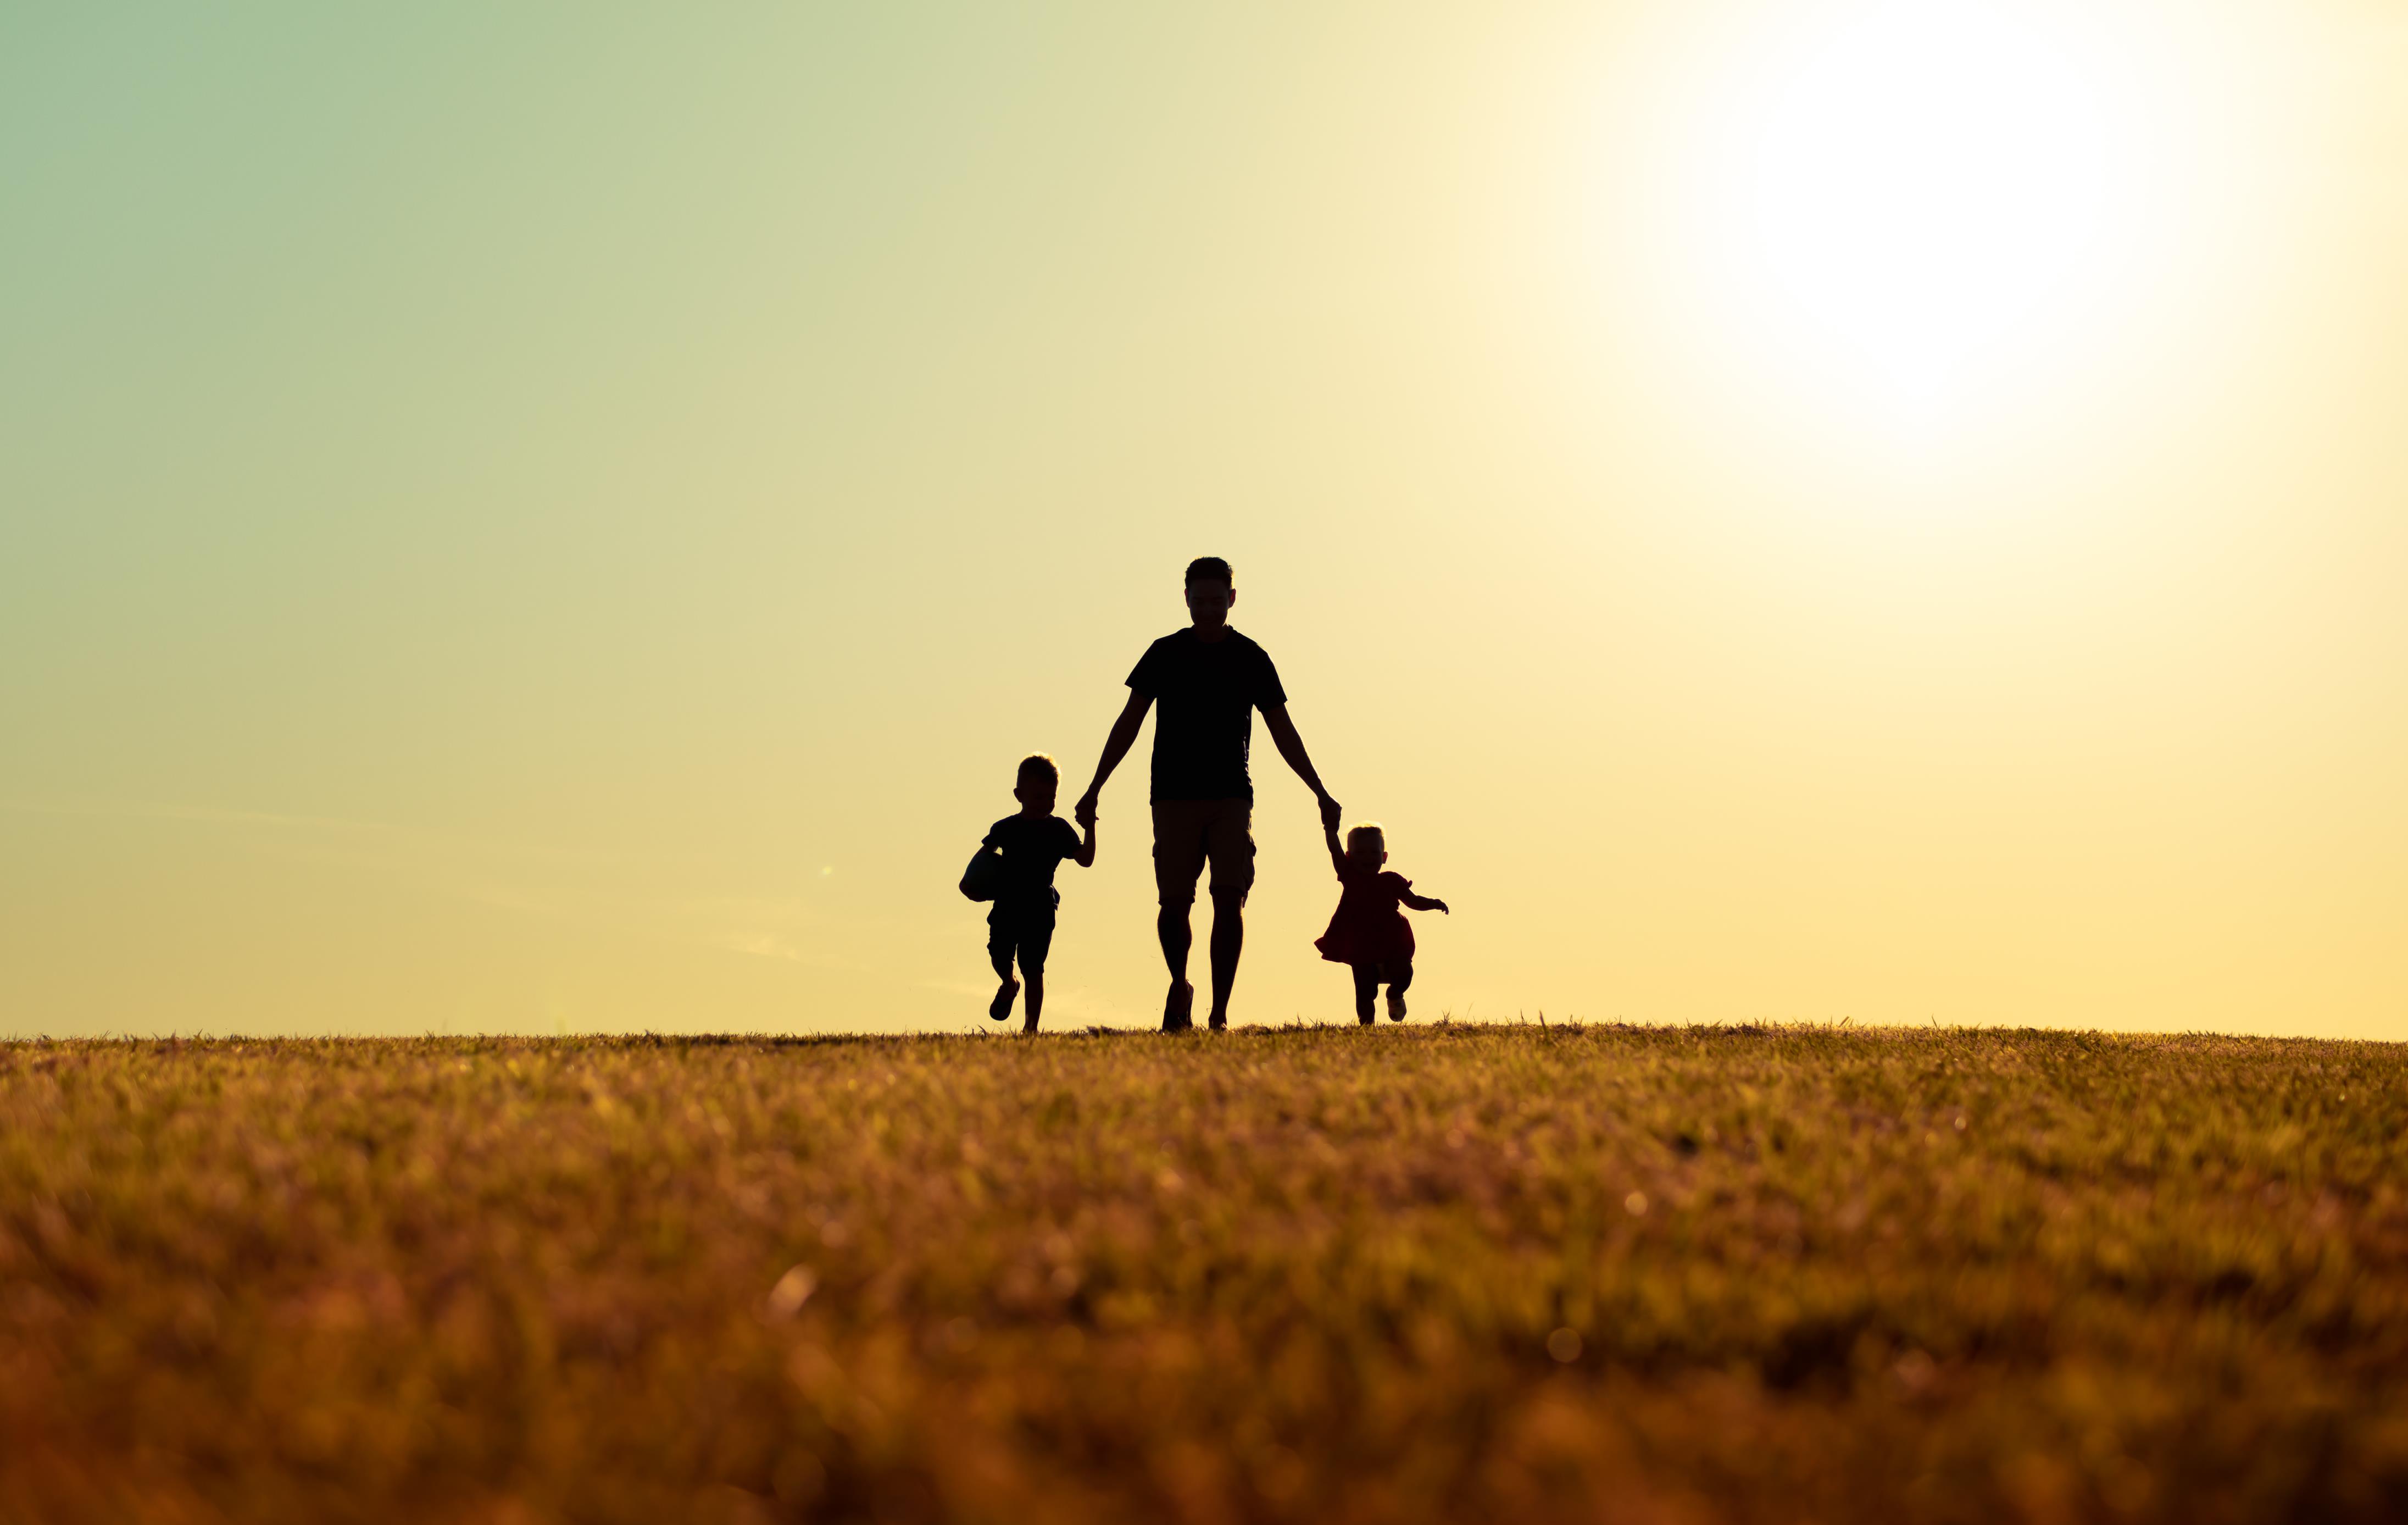 Silhouette of a father walking with son and daughter in park at sunset.